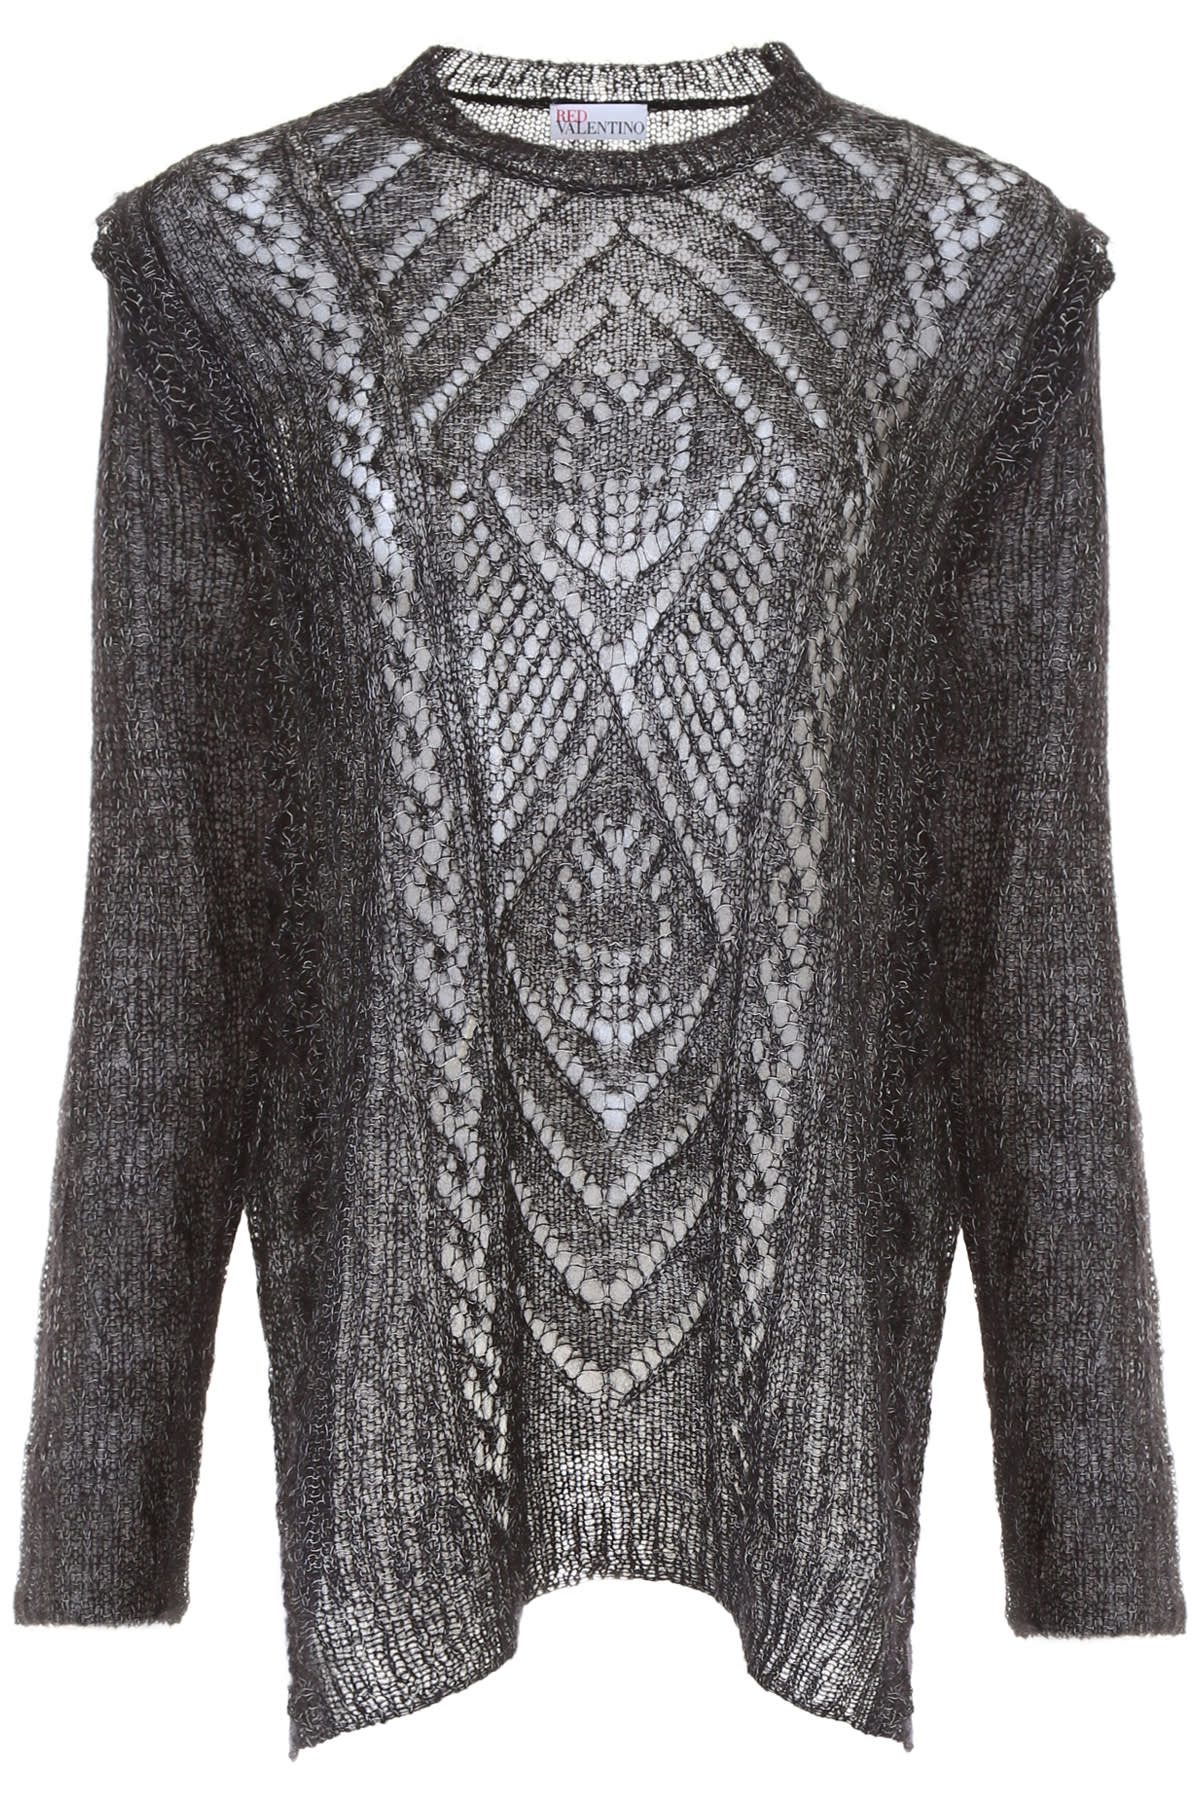 RED Valentino RED Valentino Perforated Knit Pull - BLACK (Black ...